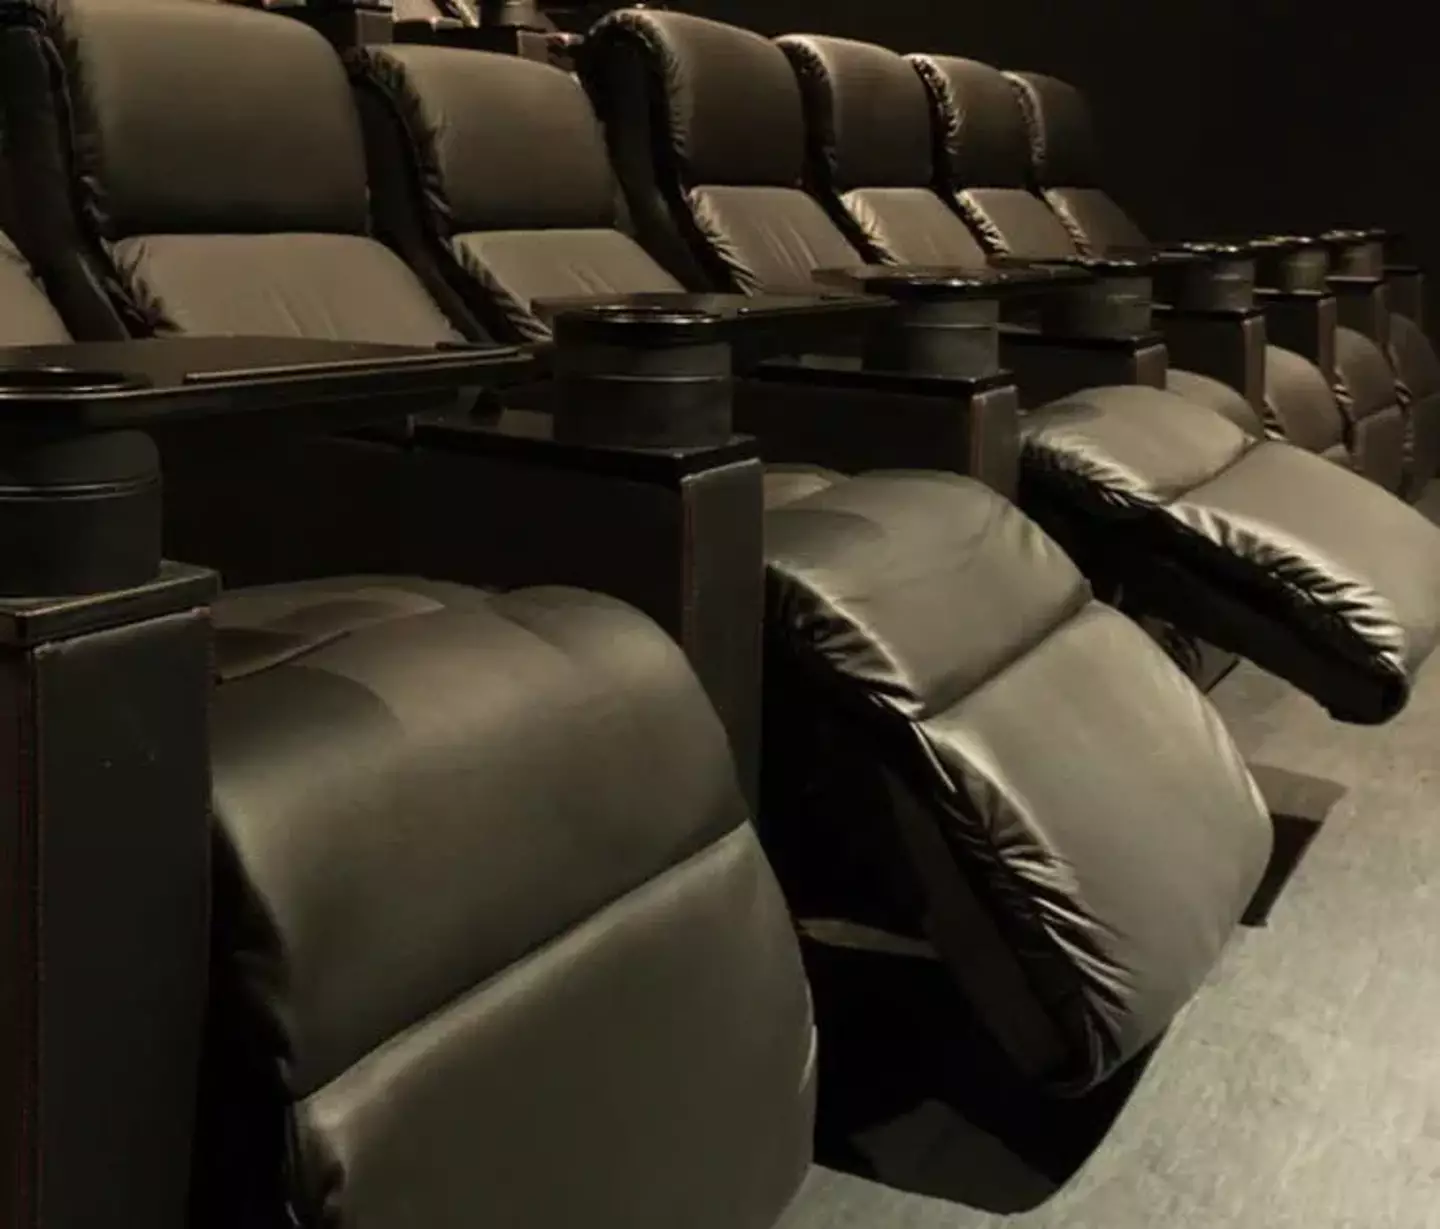 Vue is in hot water after a man claimed he was injured by their seats.